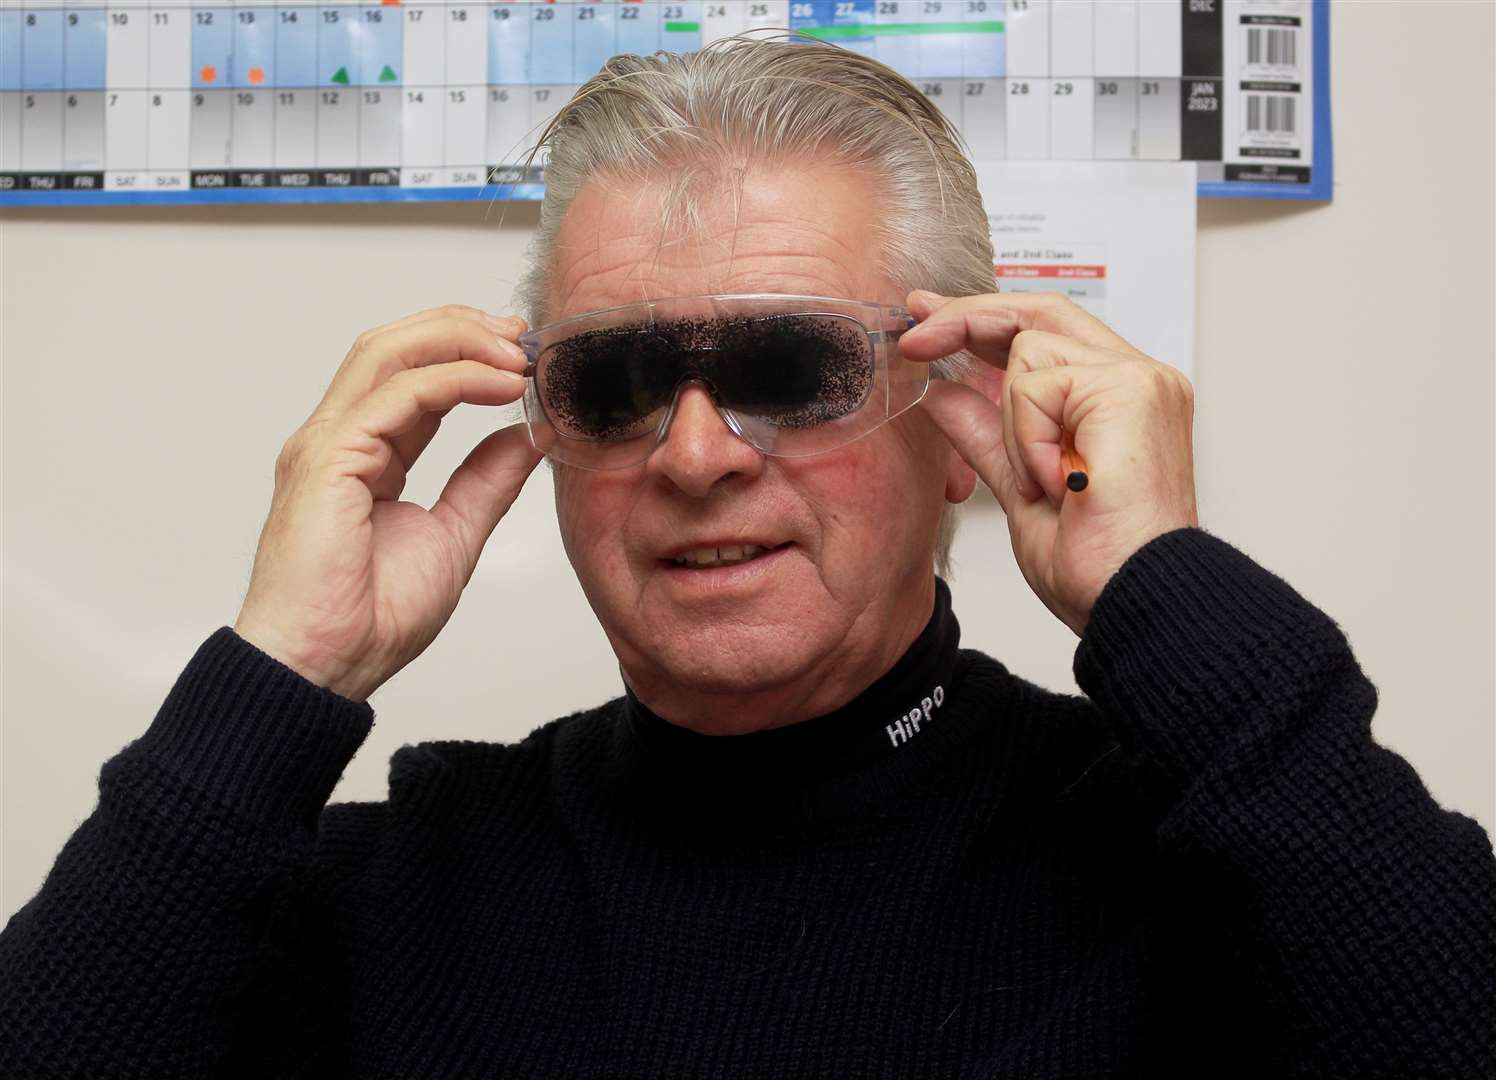 Hearing and Sight Care chairman Roy Mackenzie trying simulation specs that replicate the effects of macular degeneration.